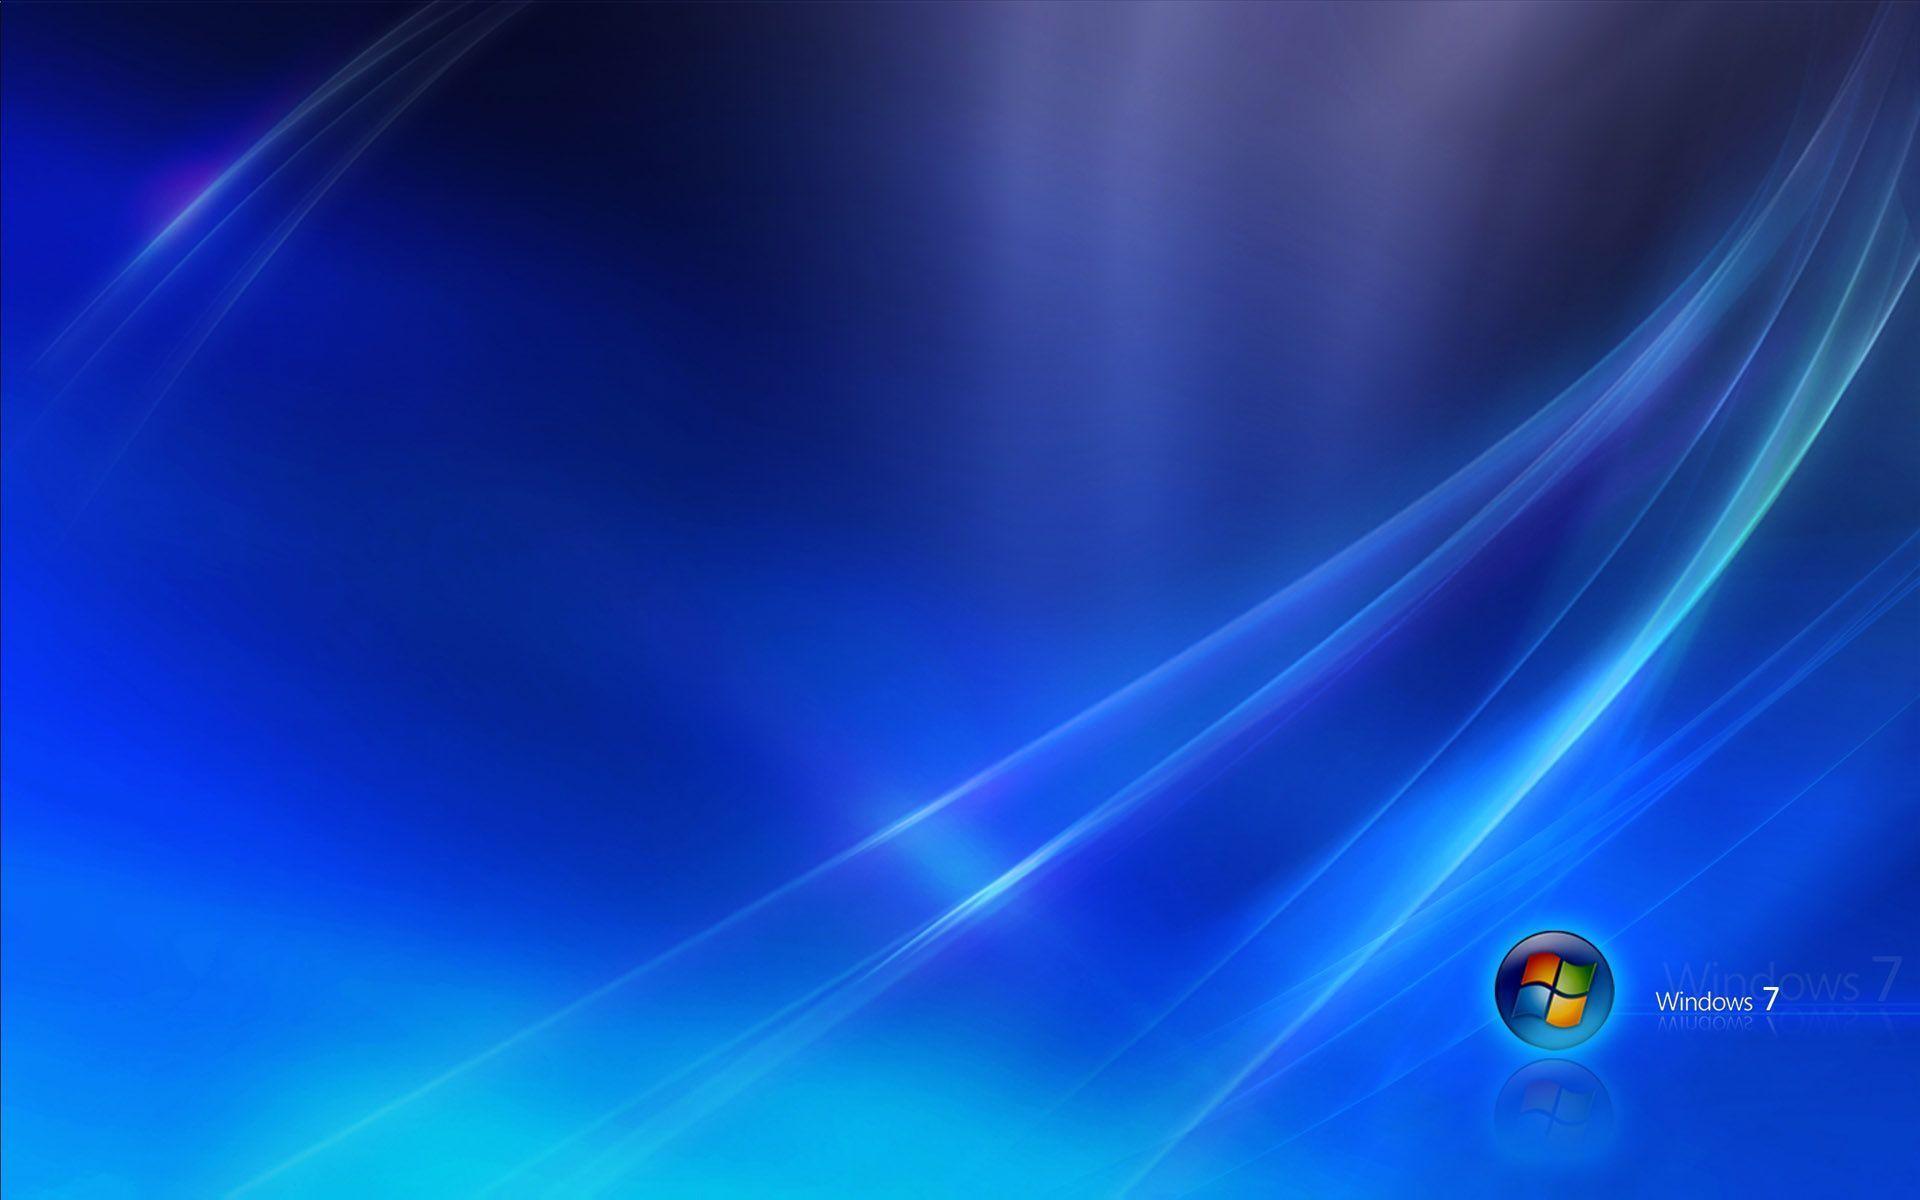 Microsoft Windows Seven wallpapers and image